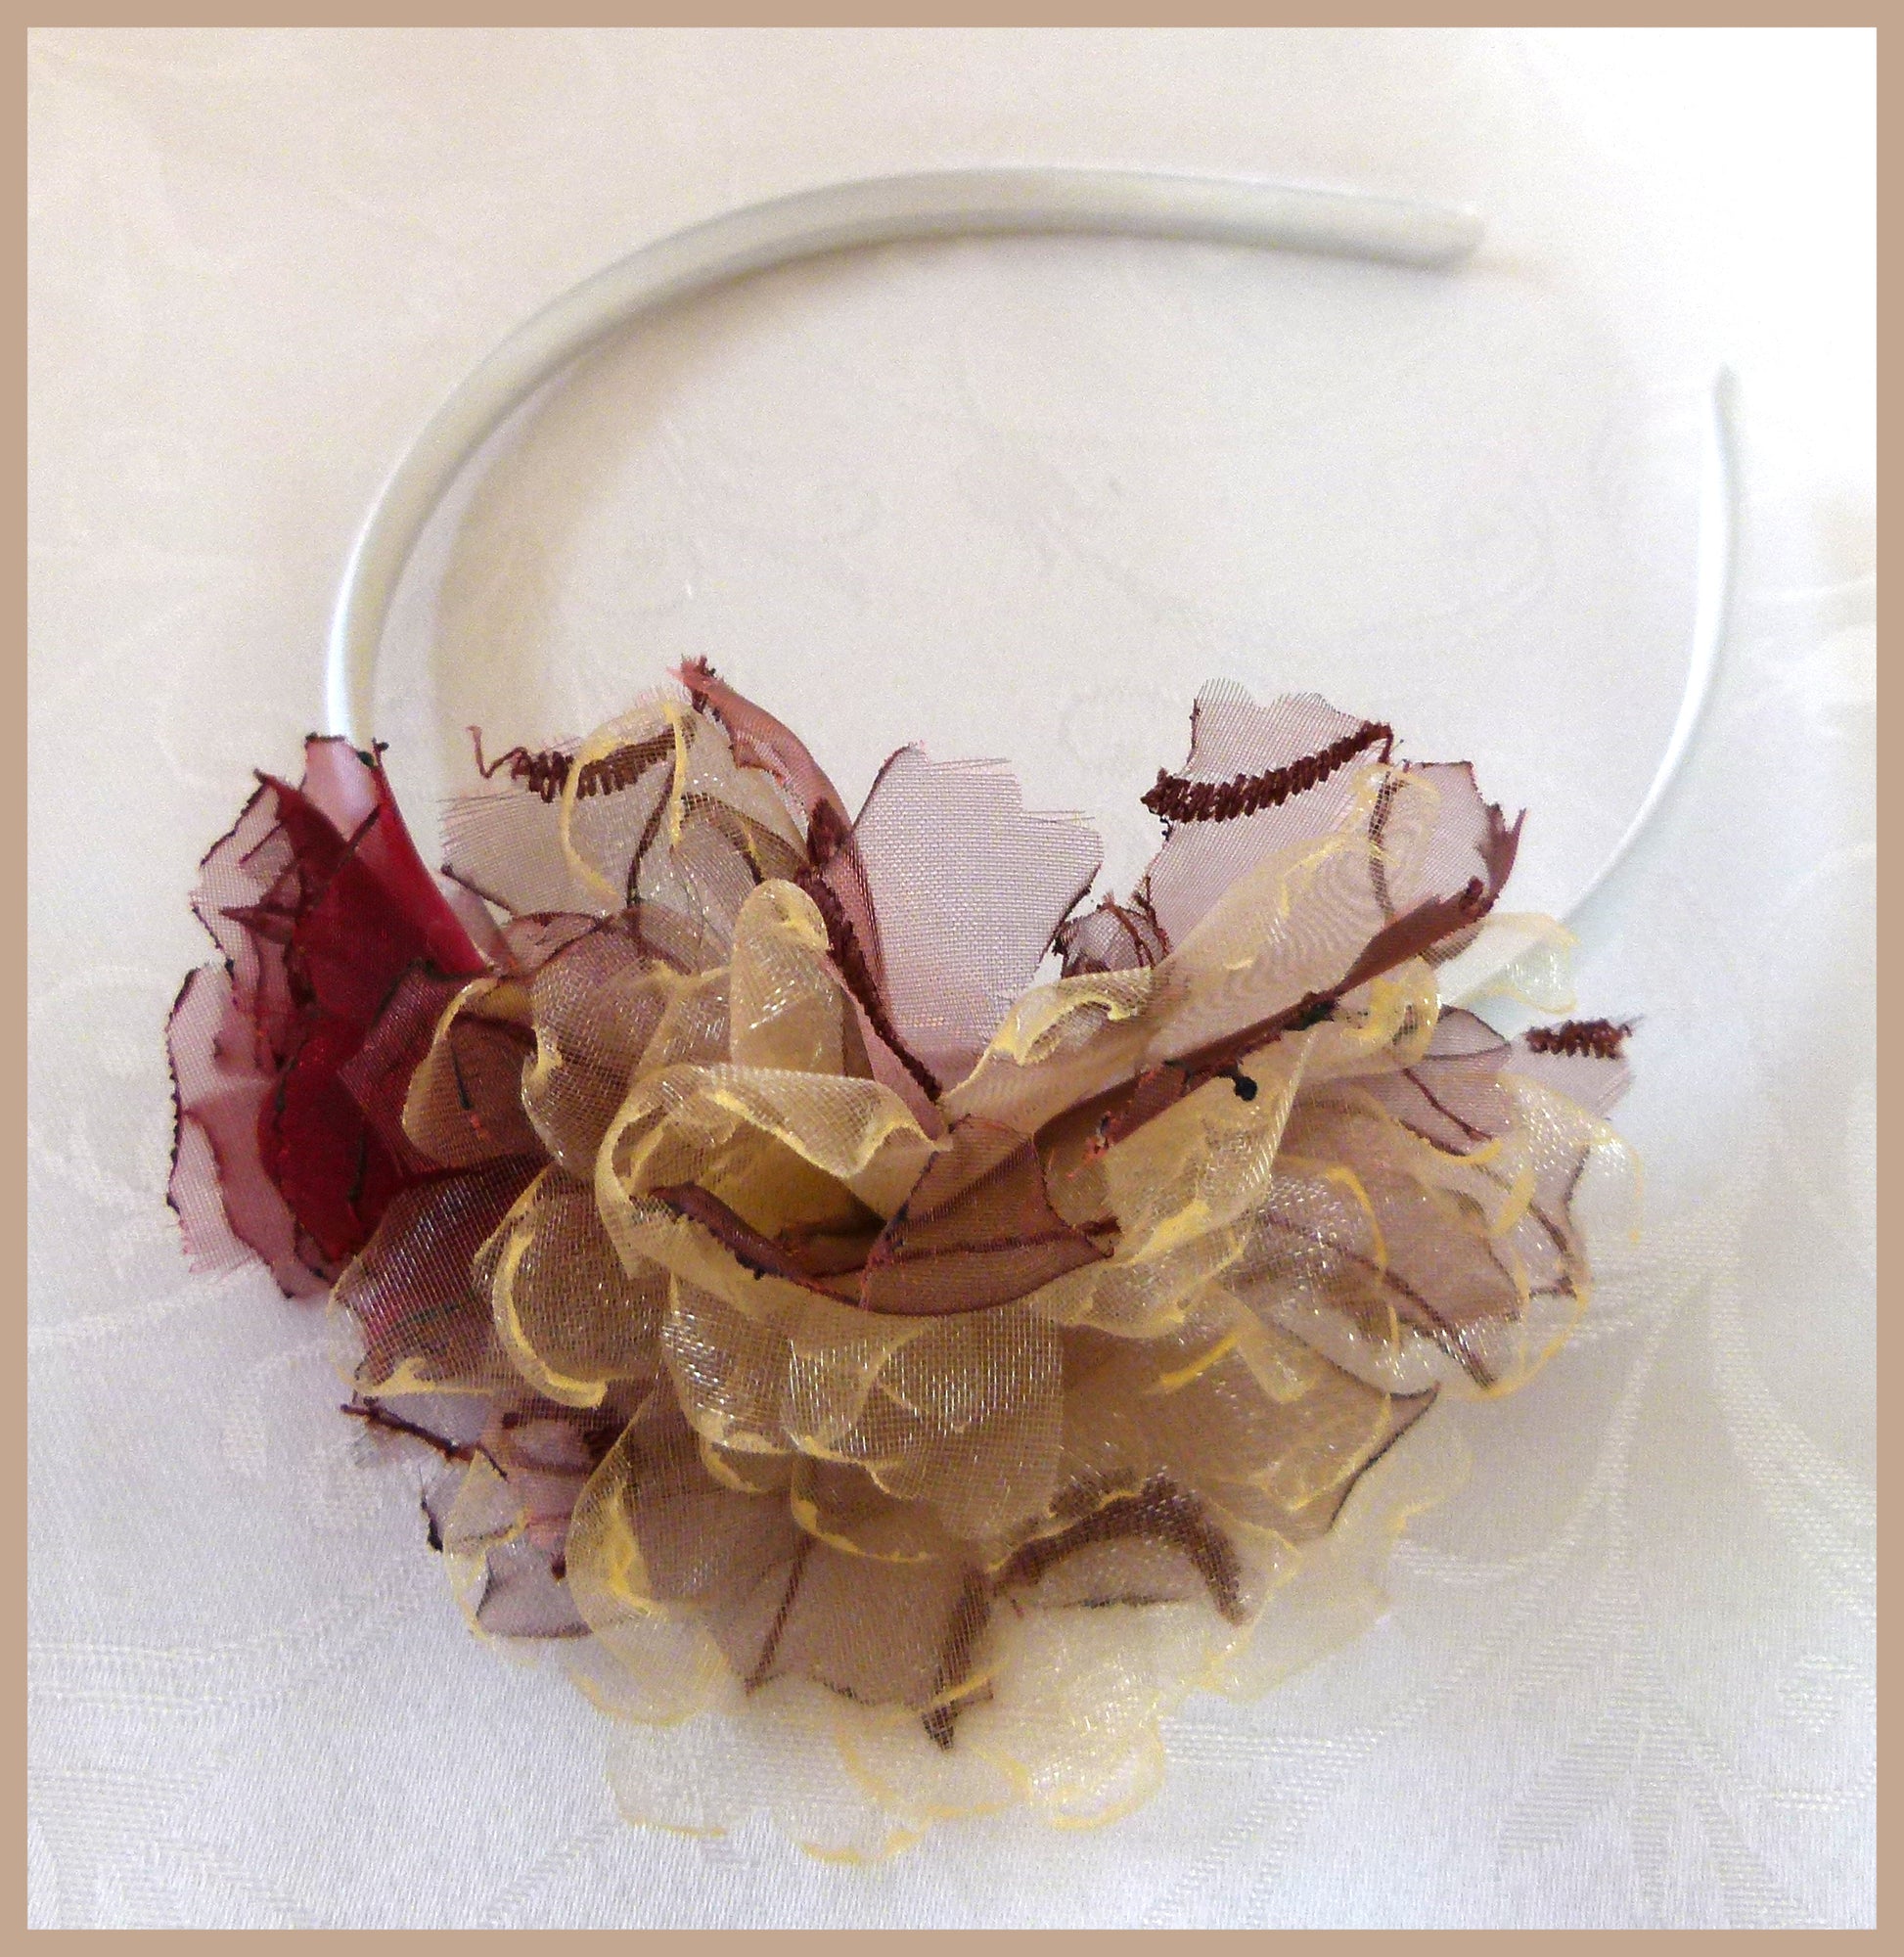 Ivory Satin-Covered Alice Band with Maroon and Cream/Brown Beaded Organza Flowers